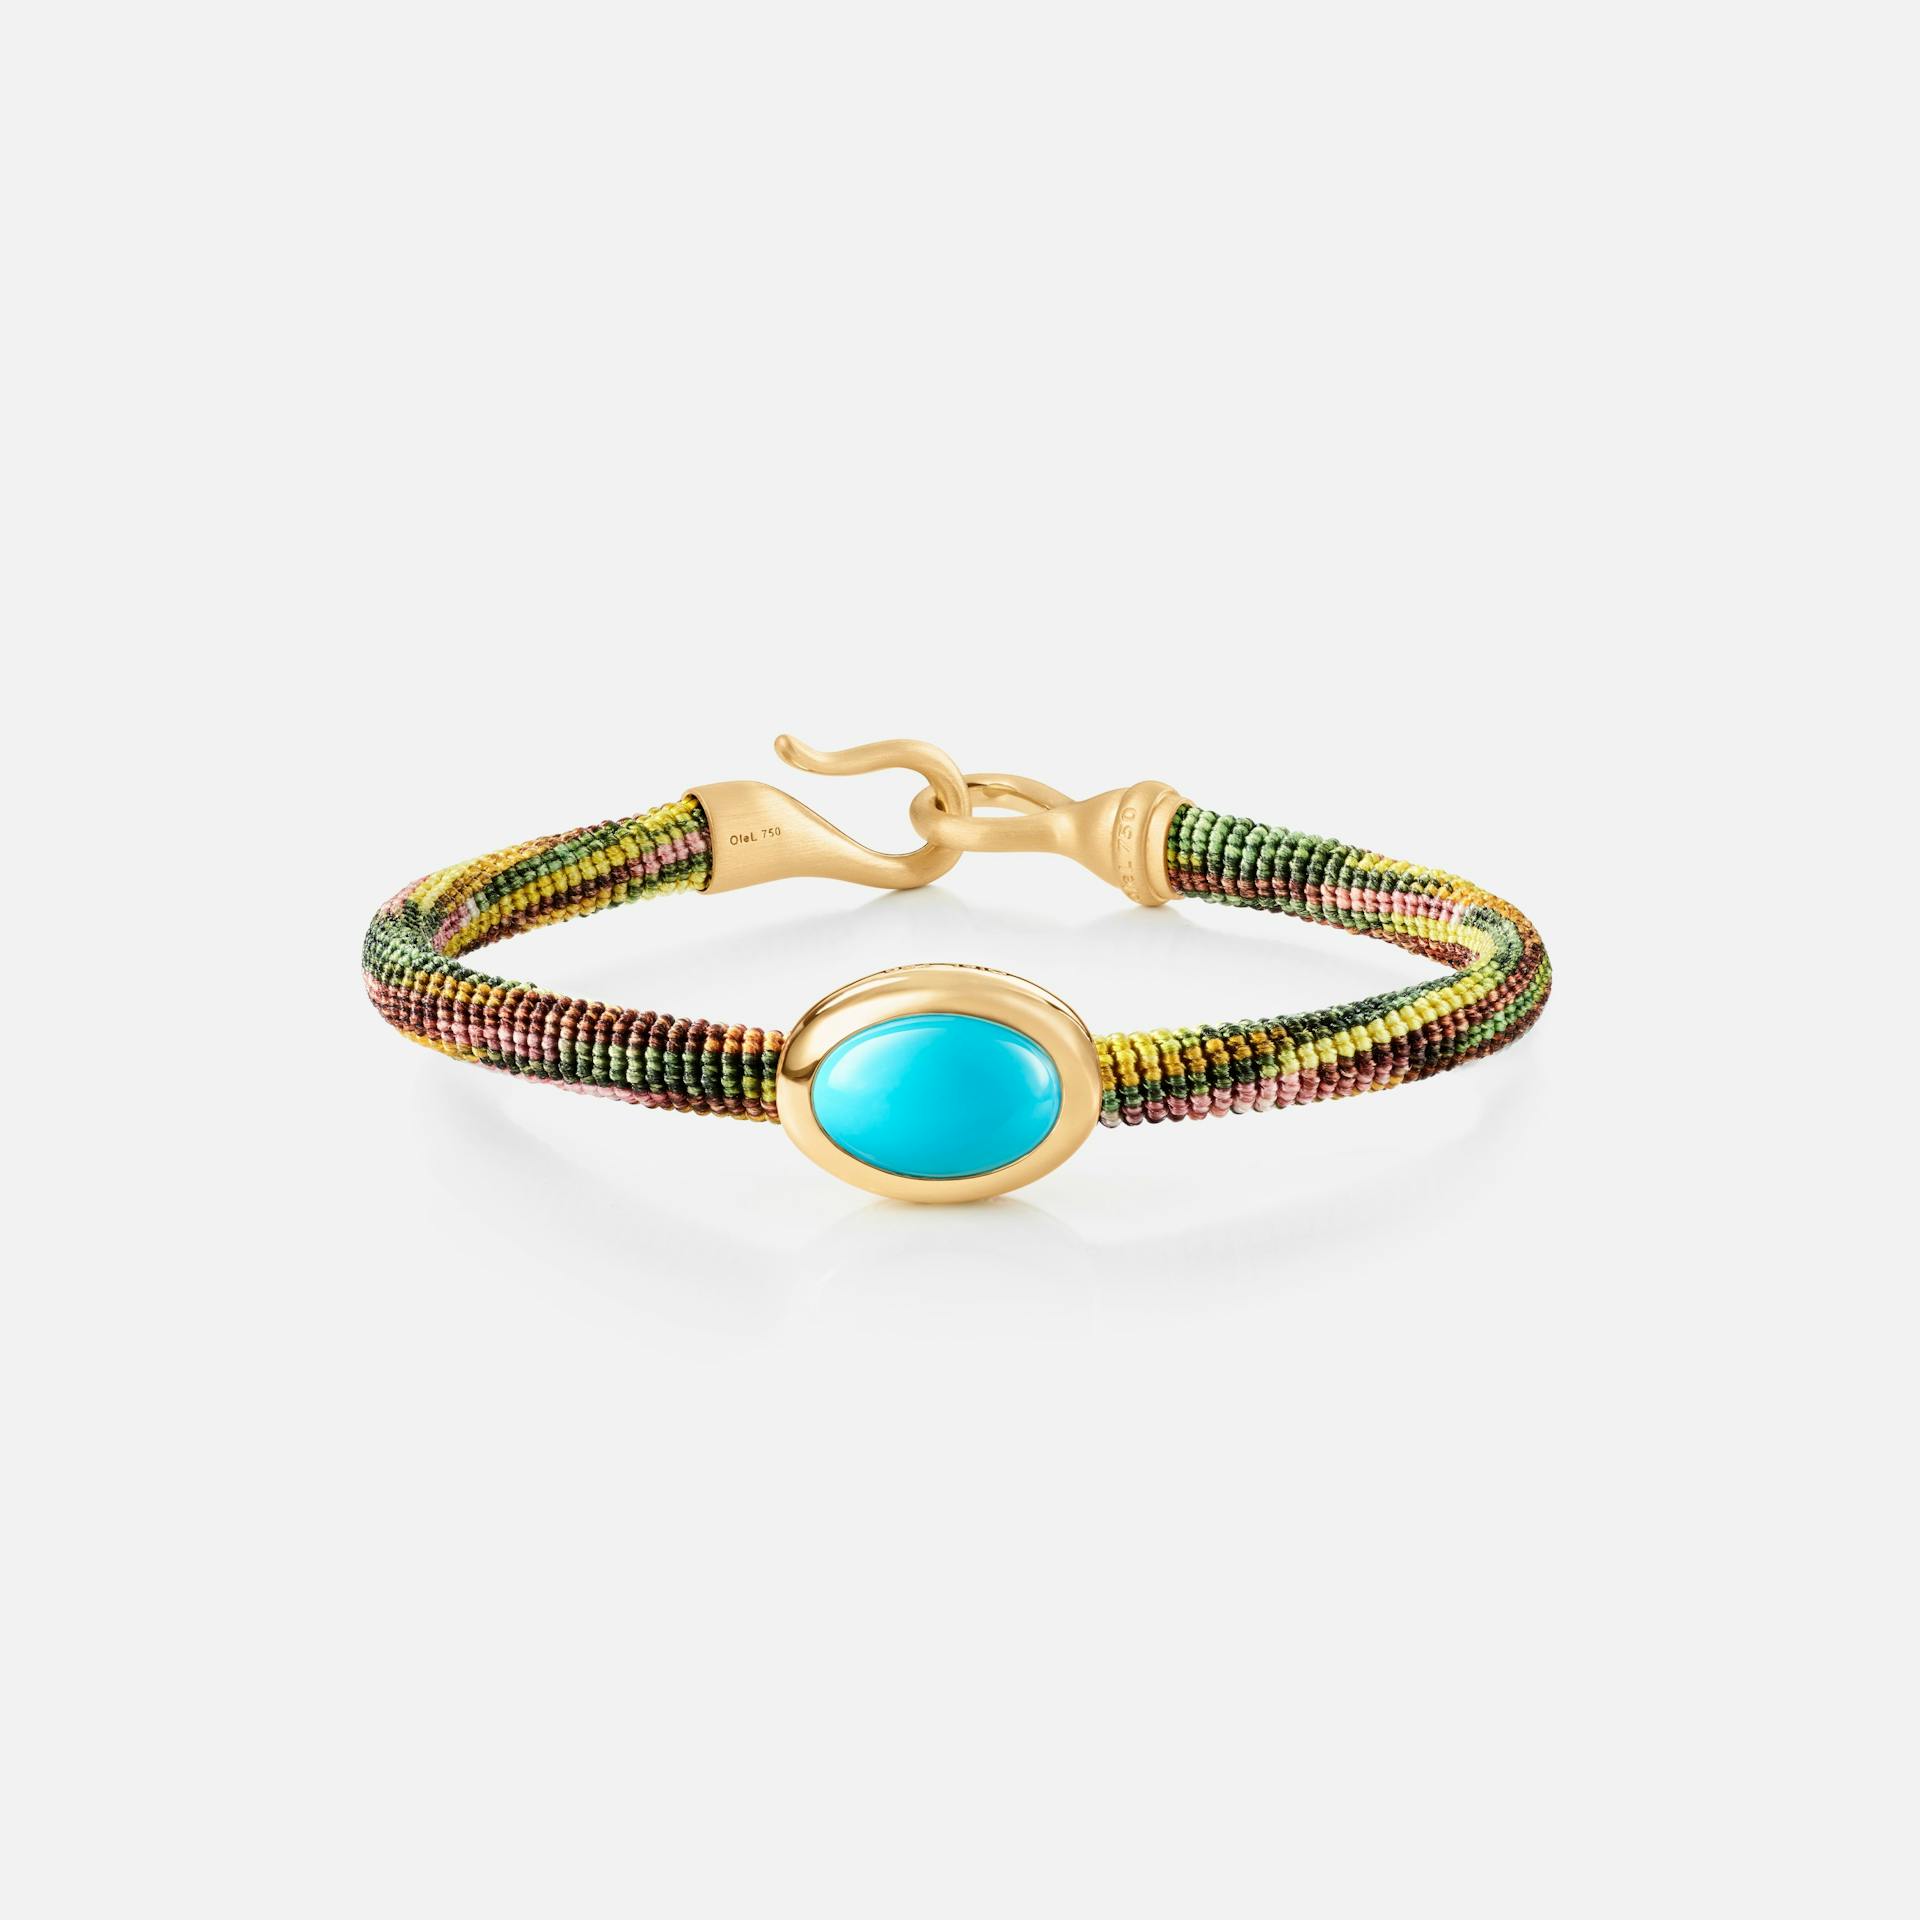 Life Bracelet with turquoise 6 mm